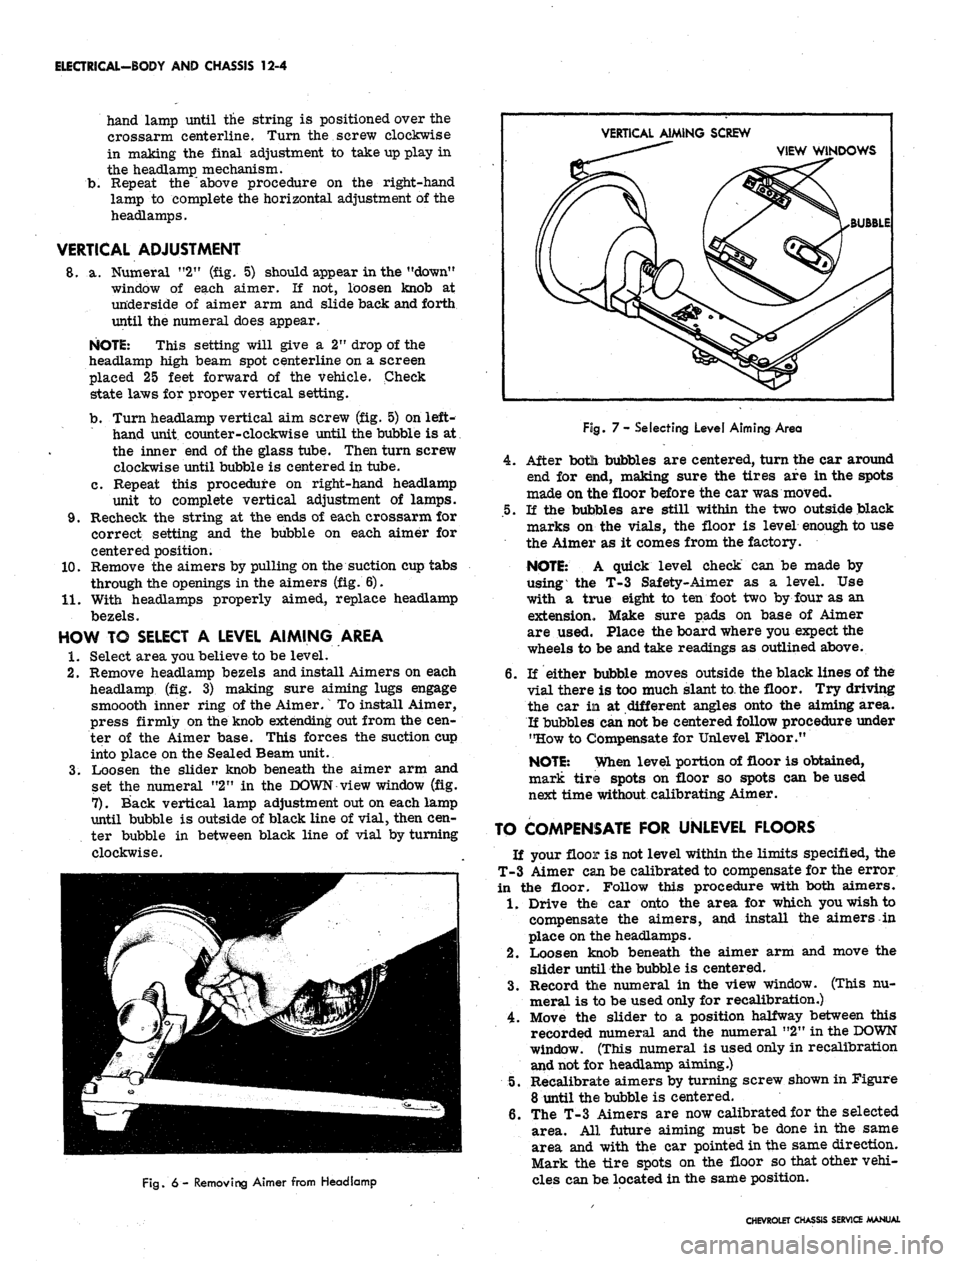 CHEVROLET CAMARO 1967 1.G Chassis Workshop Manual 
ELECTRICAL-BODY AND CHASSIS 12-4

b. 
hand lamp until the string is positioned over the

crossarm centerline. Turn the screw clockwise

in making the final adjustment to take up play in

the headlamp